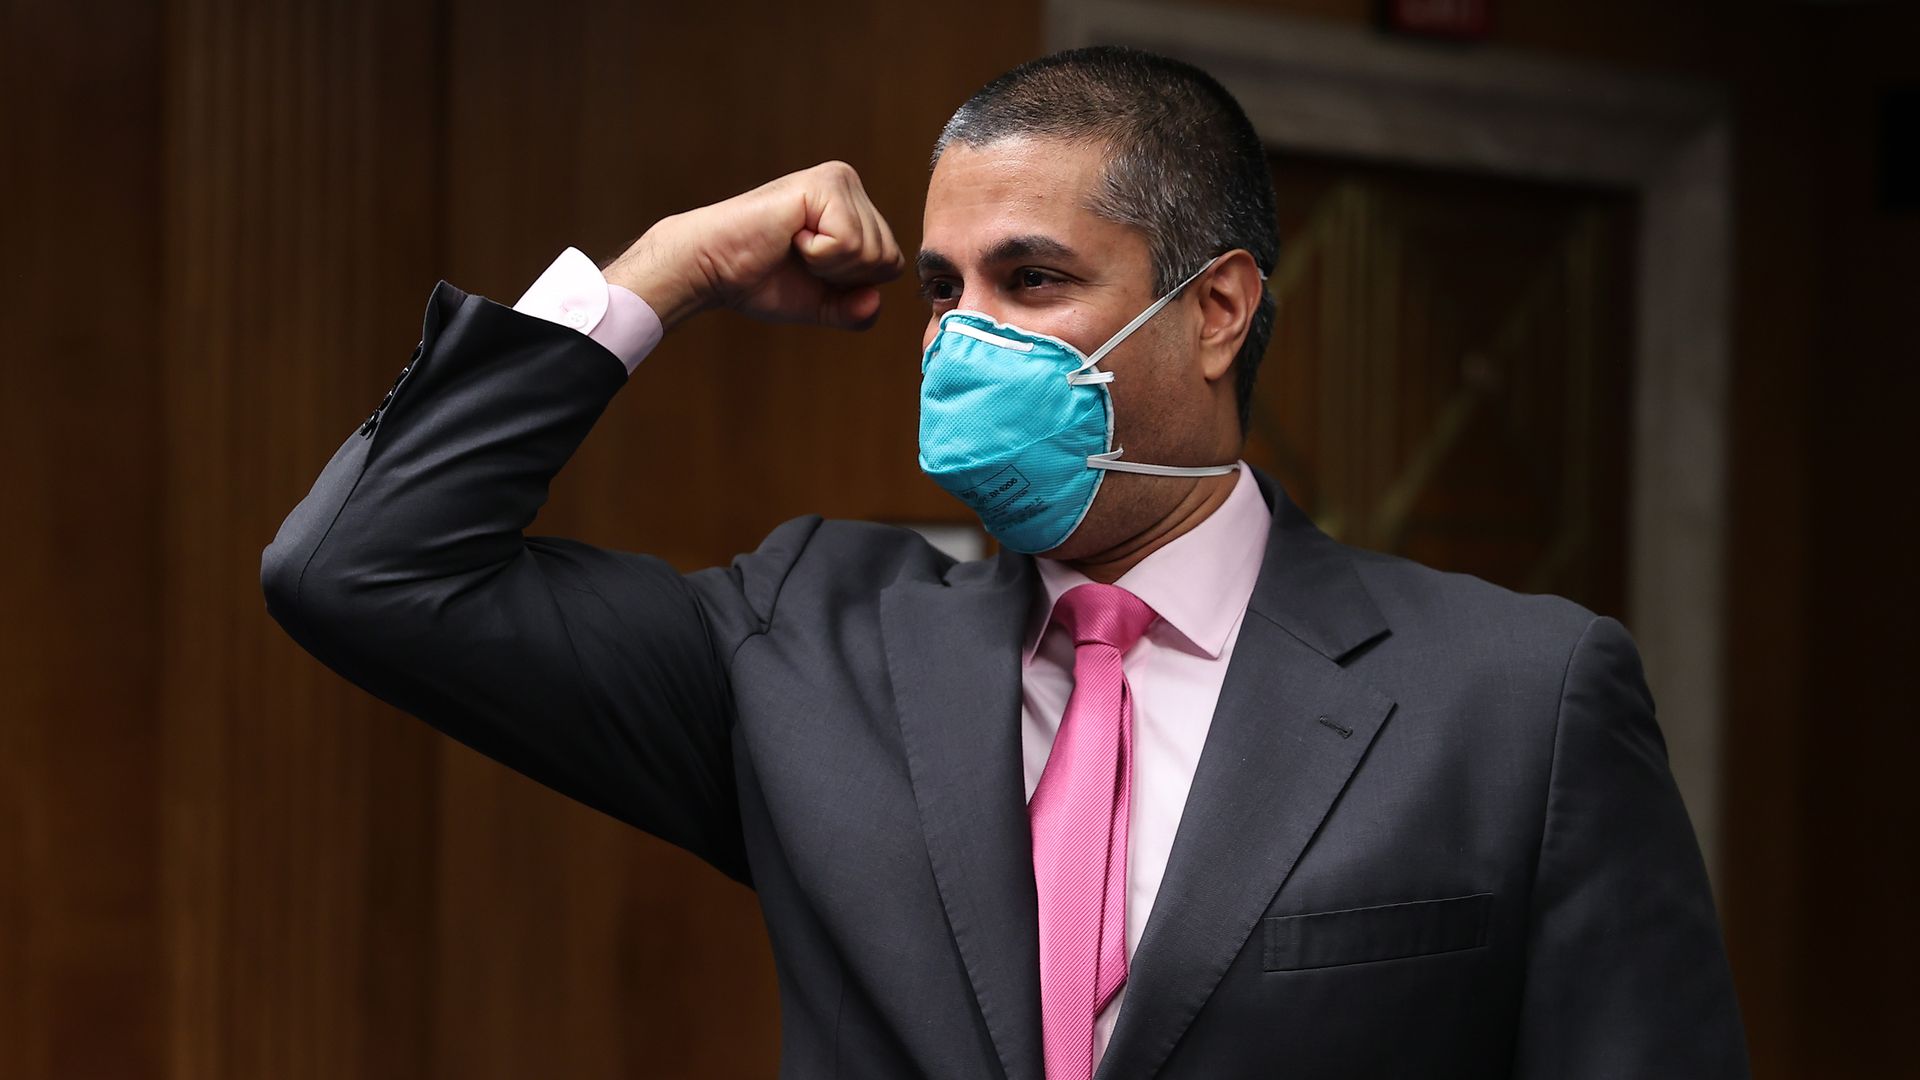 FCC Chairman Ajit Pai wears a mask and extends his elbow in greeting